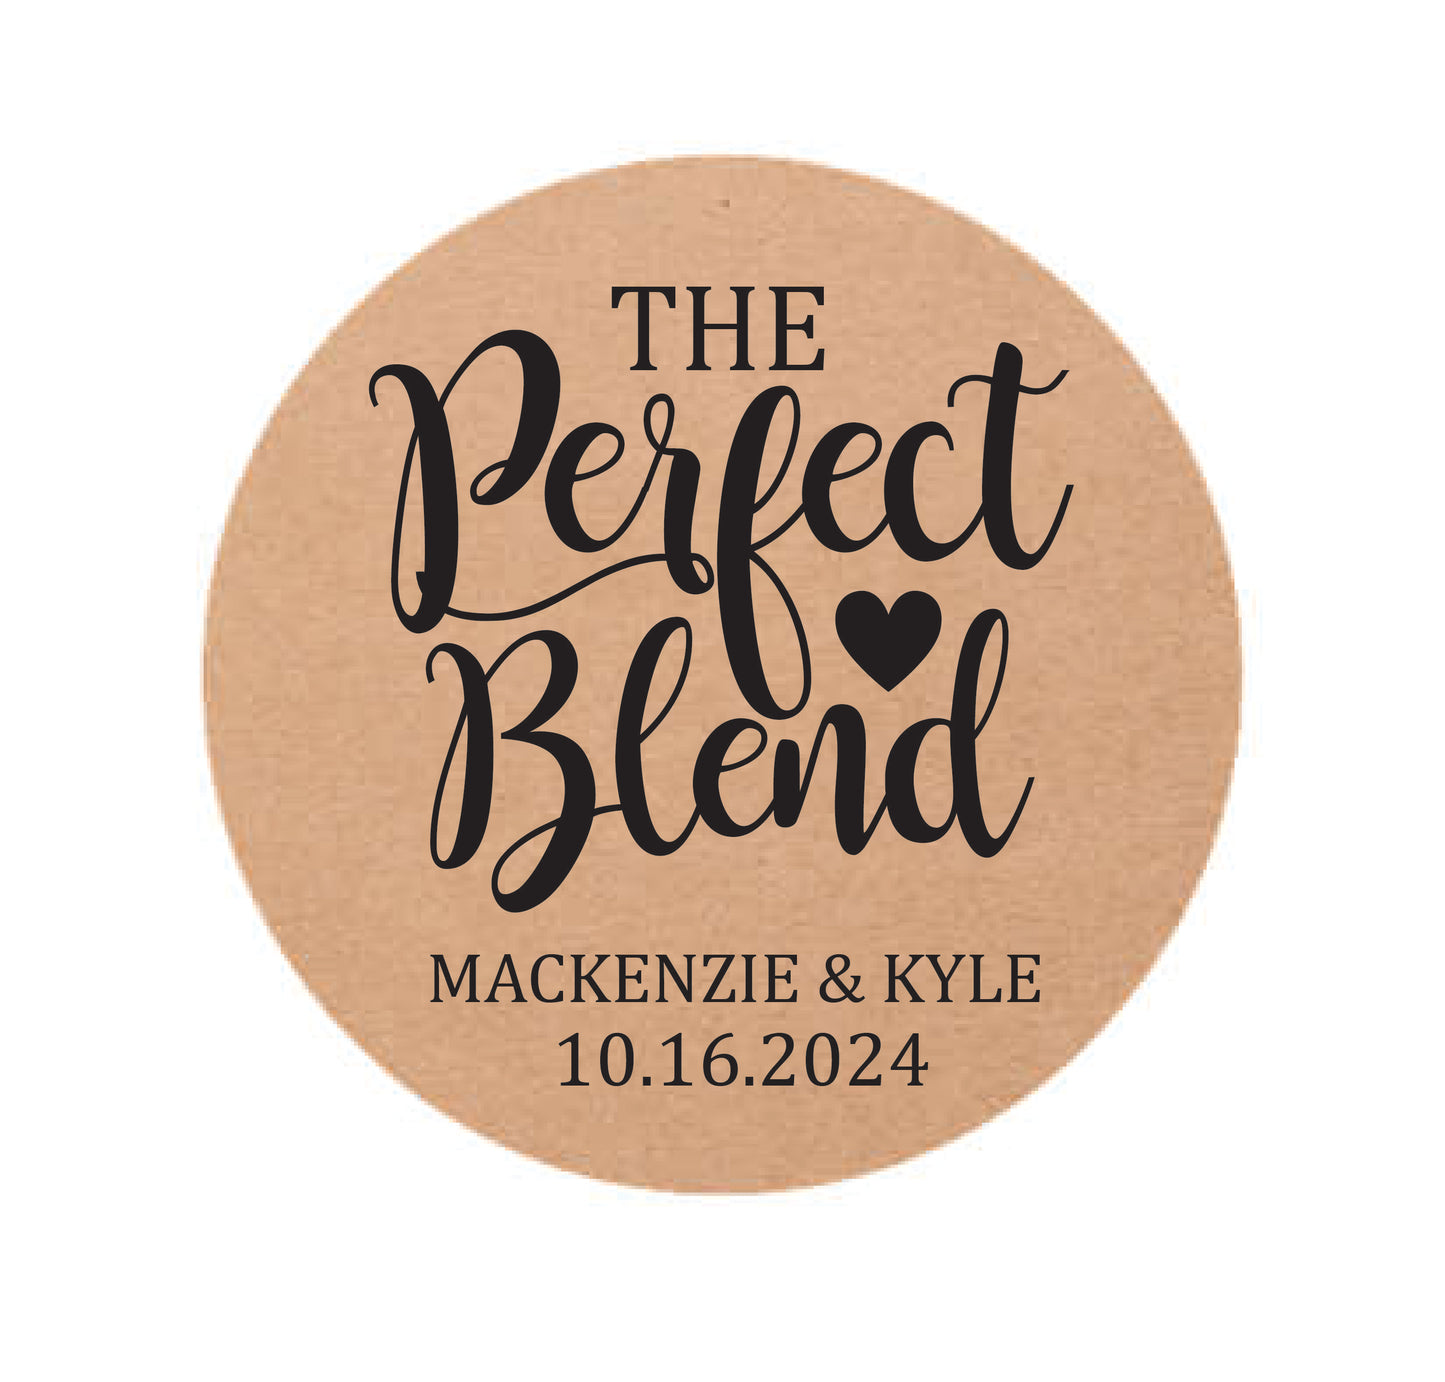 The perfect blend wedding stickers- brown kraft